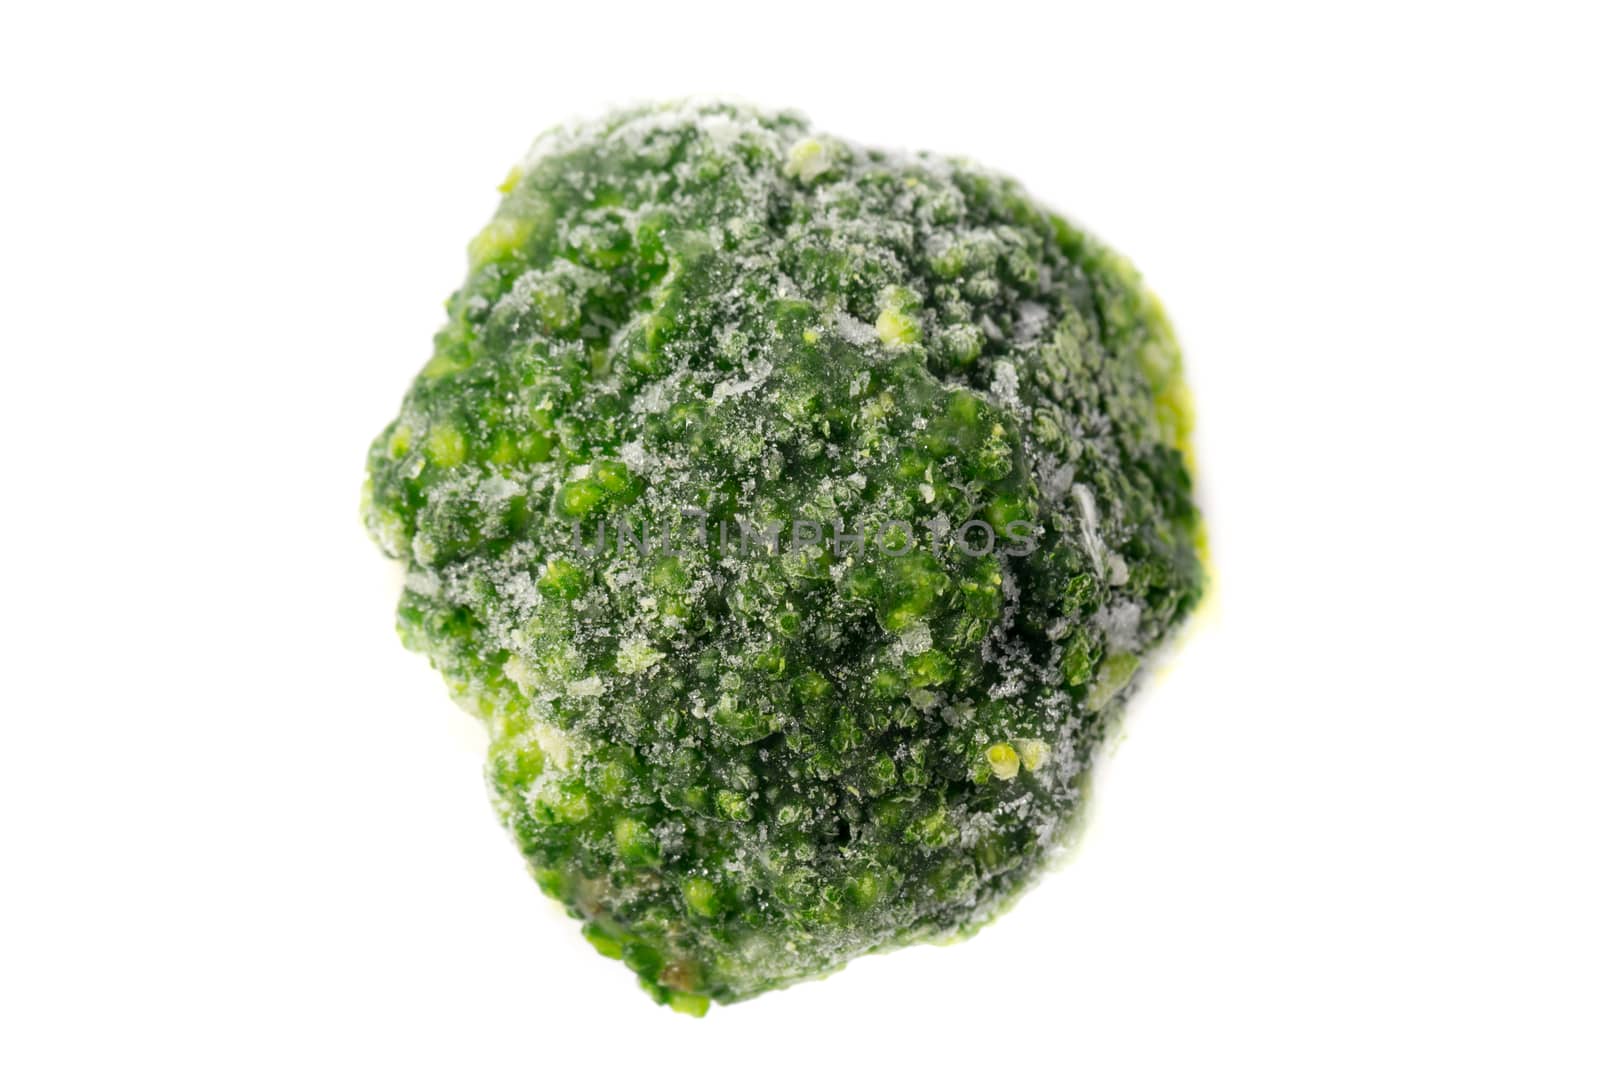 Close up picture of a frozen broccoli